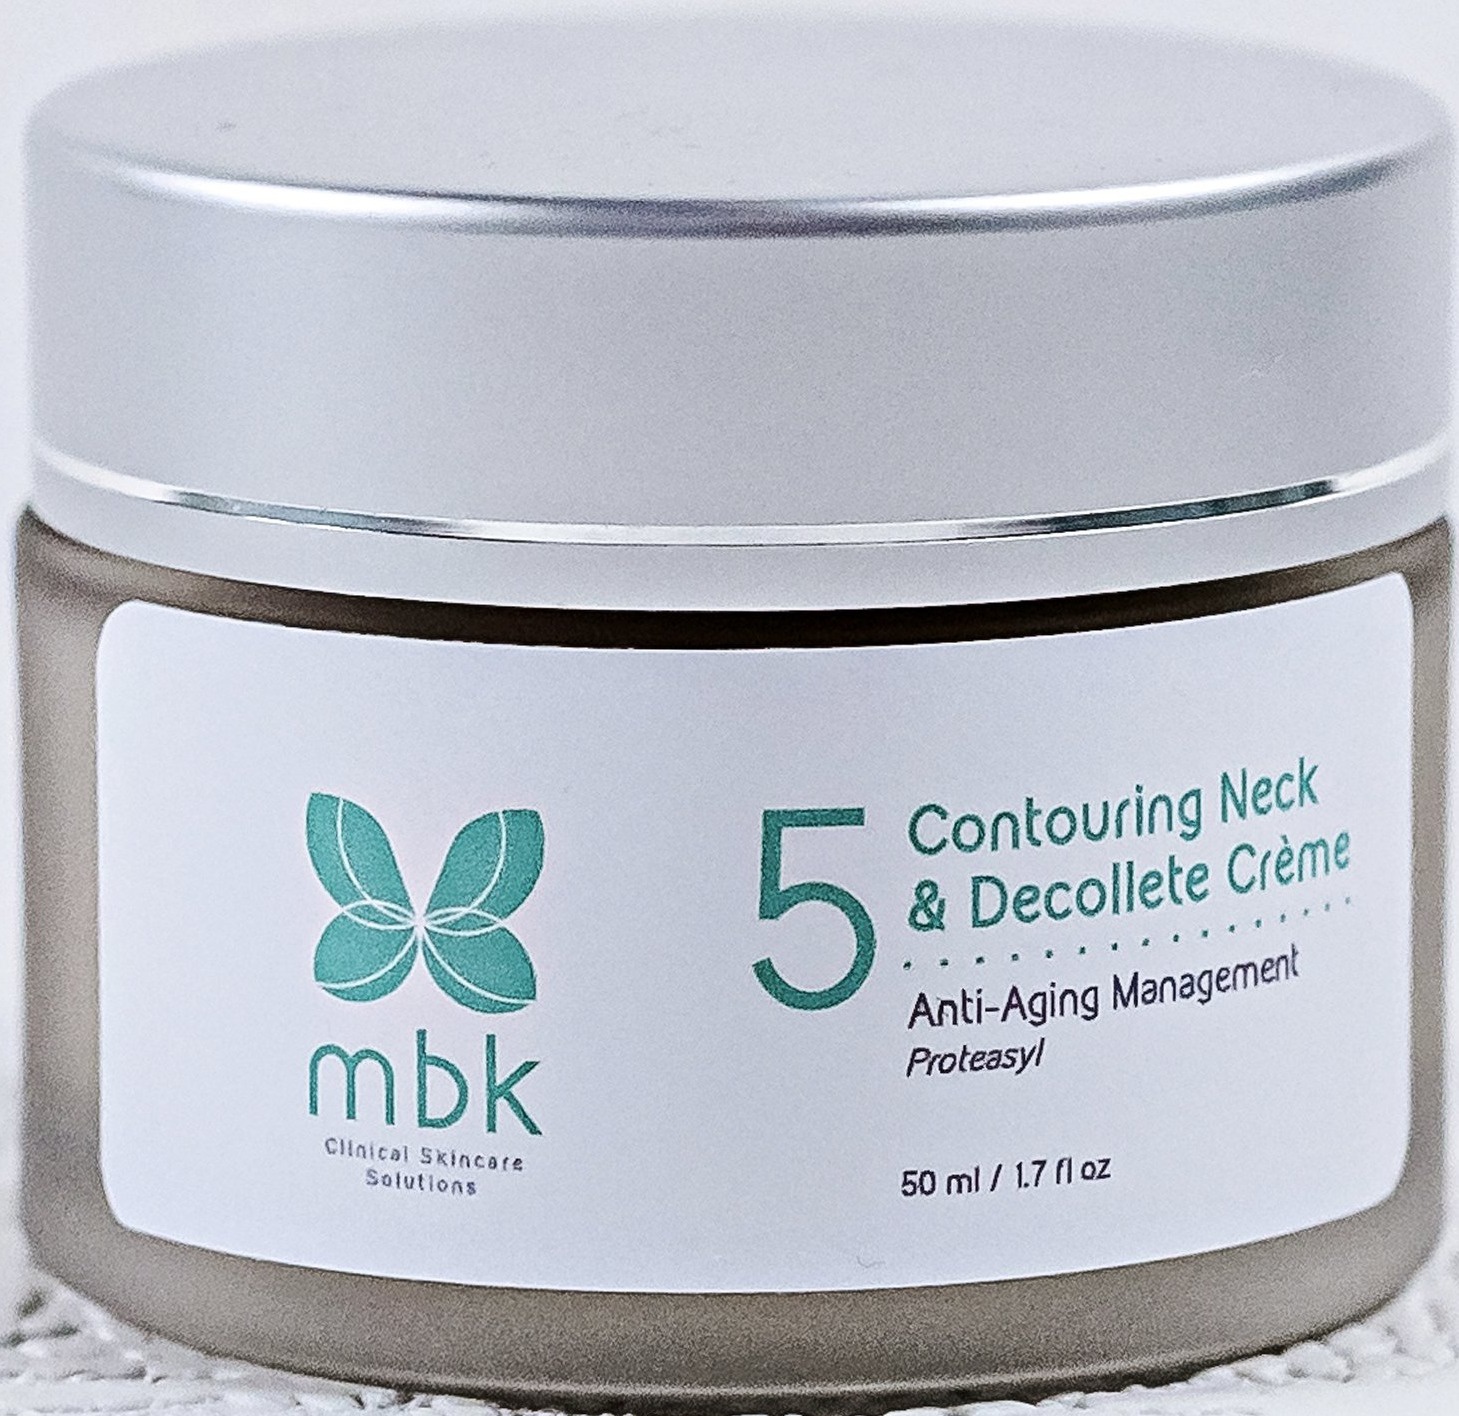 MBK Clinical Skincare Solutions Contouring Neck & Decollete Creme